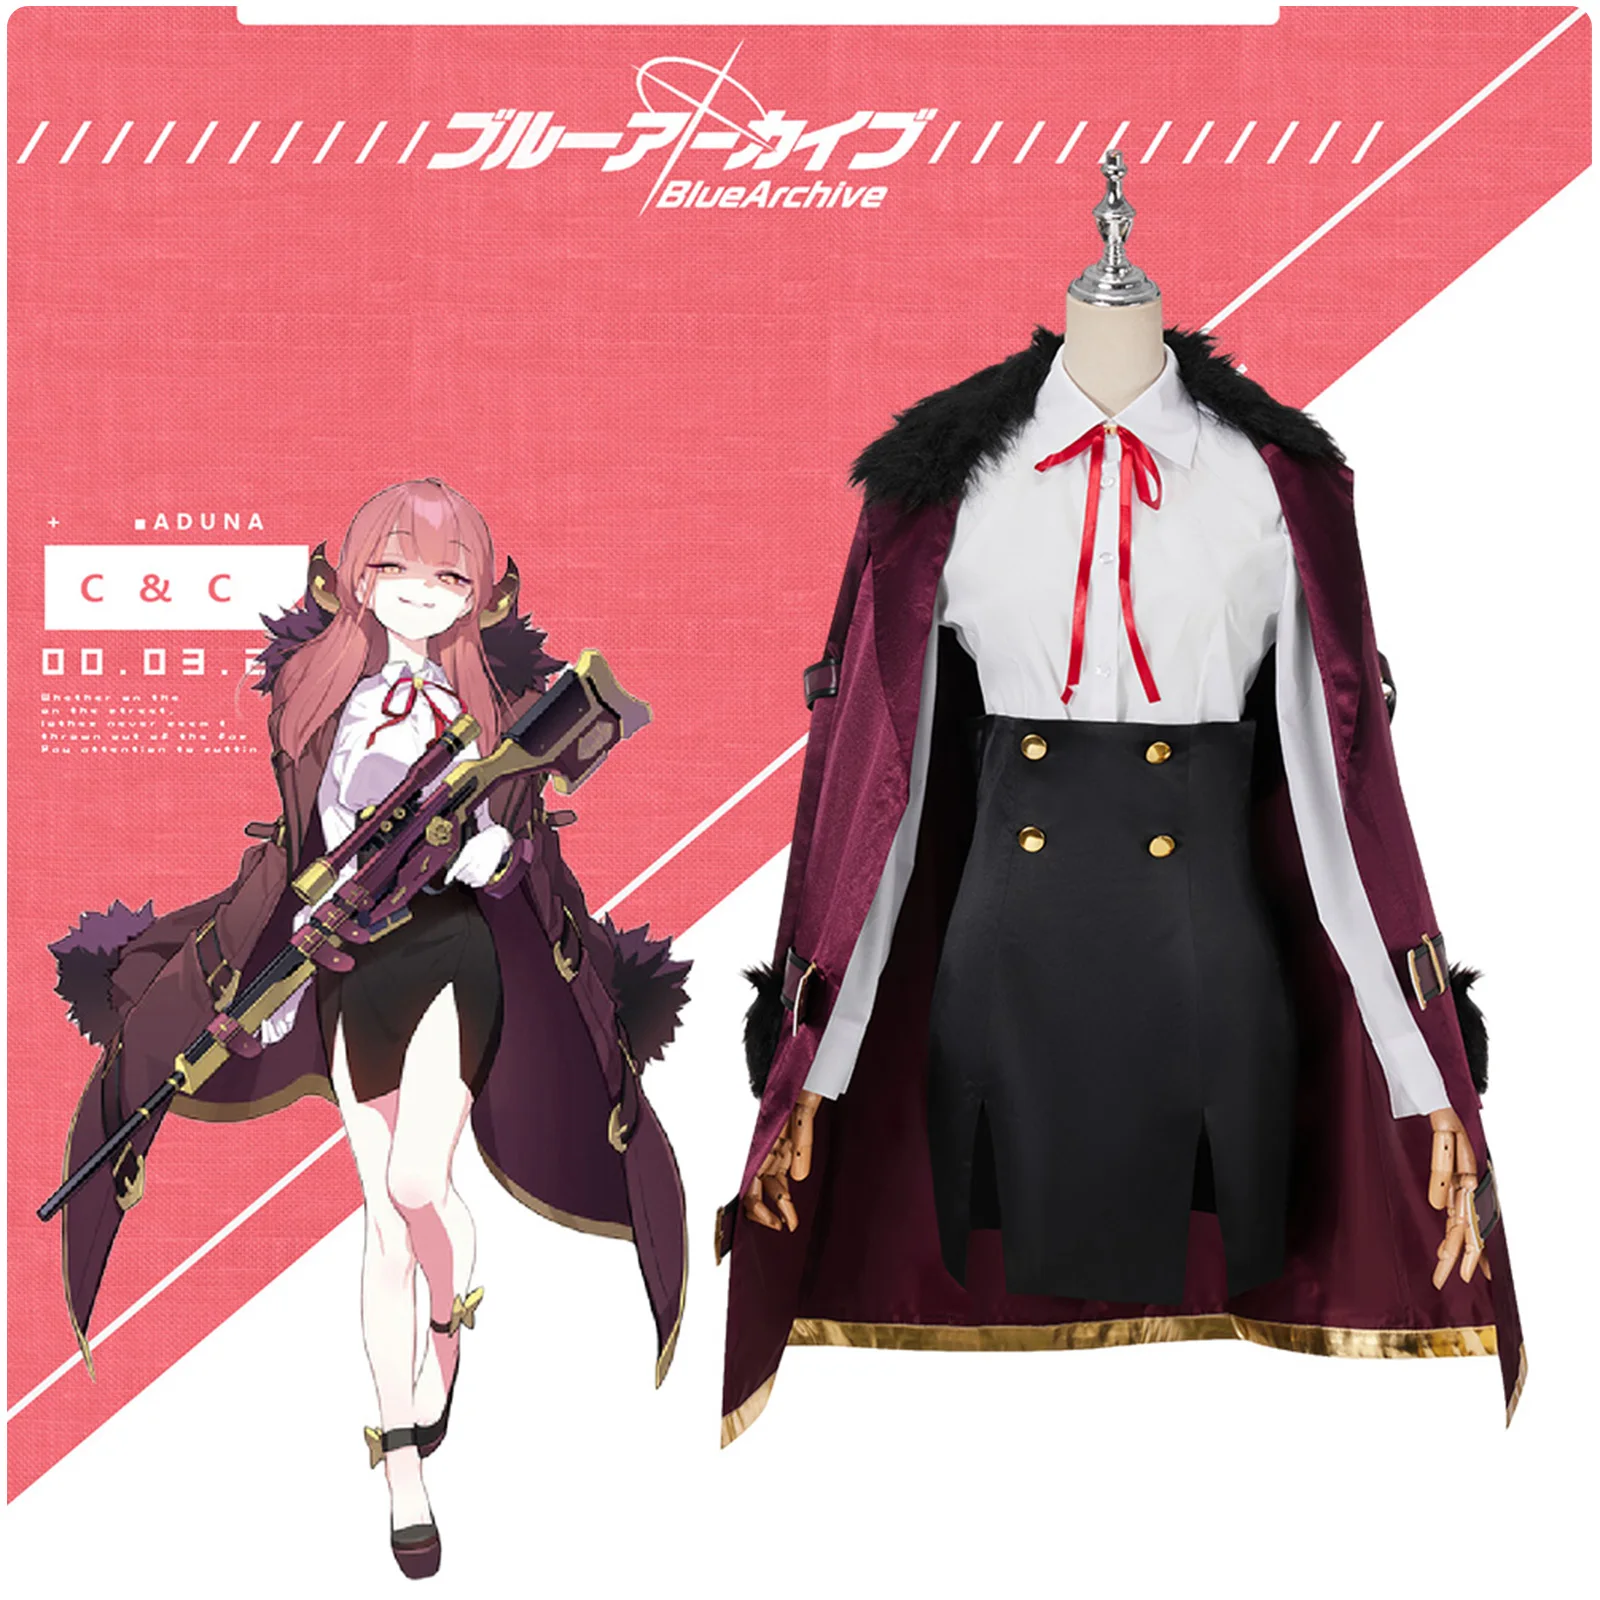 

Game Blue Archive Rikuhachima Aru Customize Cosplay Costume Uniform Belt Black Tight Skirt Bow-Tie Halloween Outfits